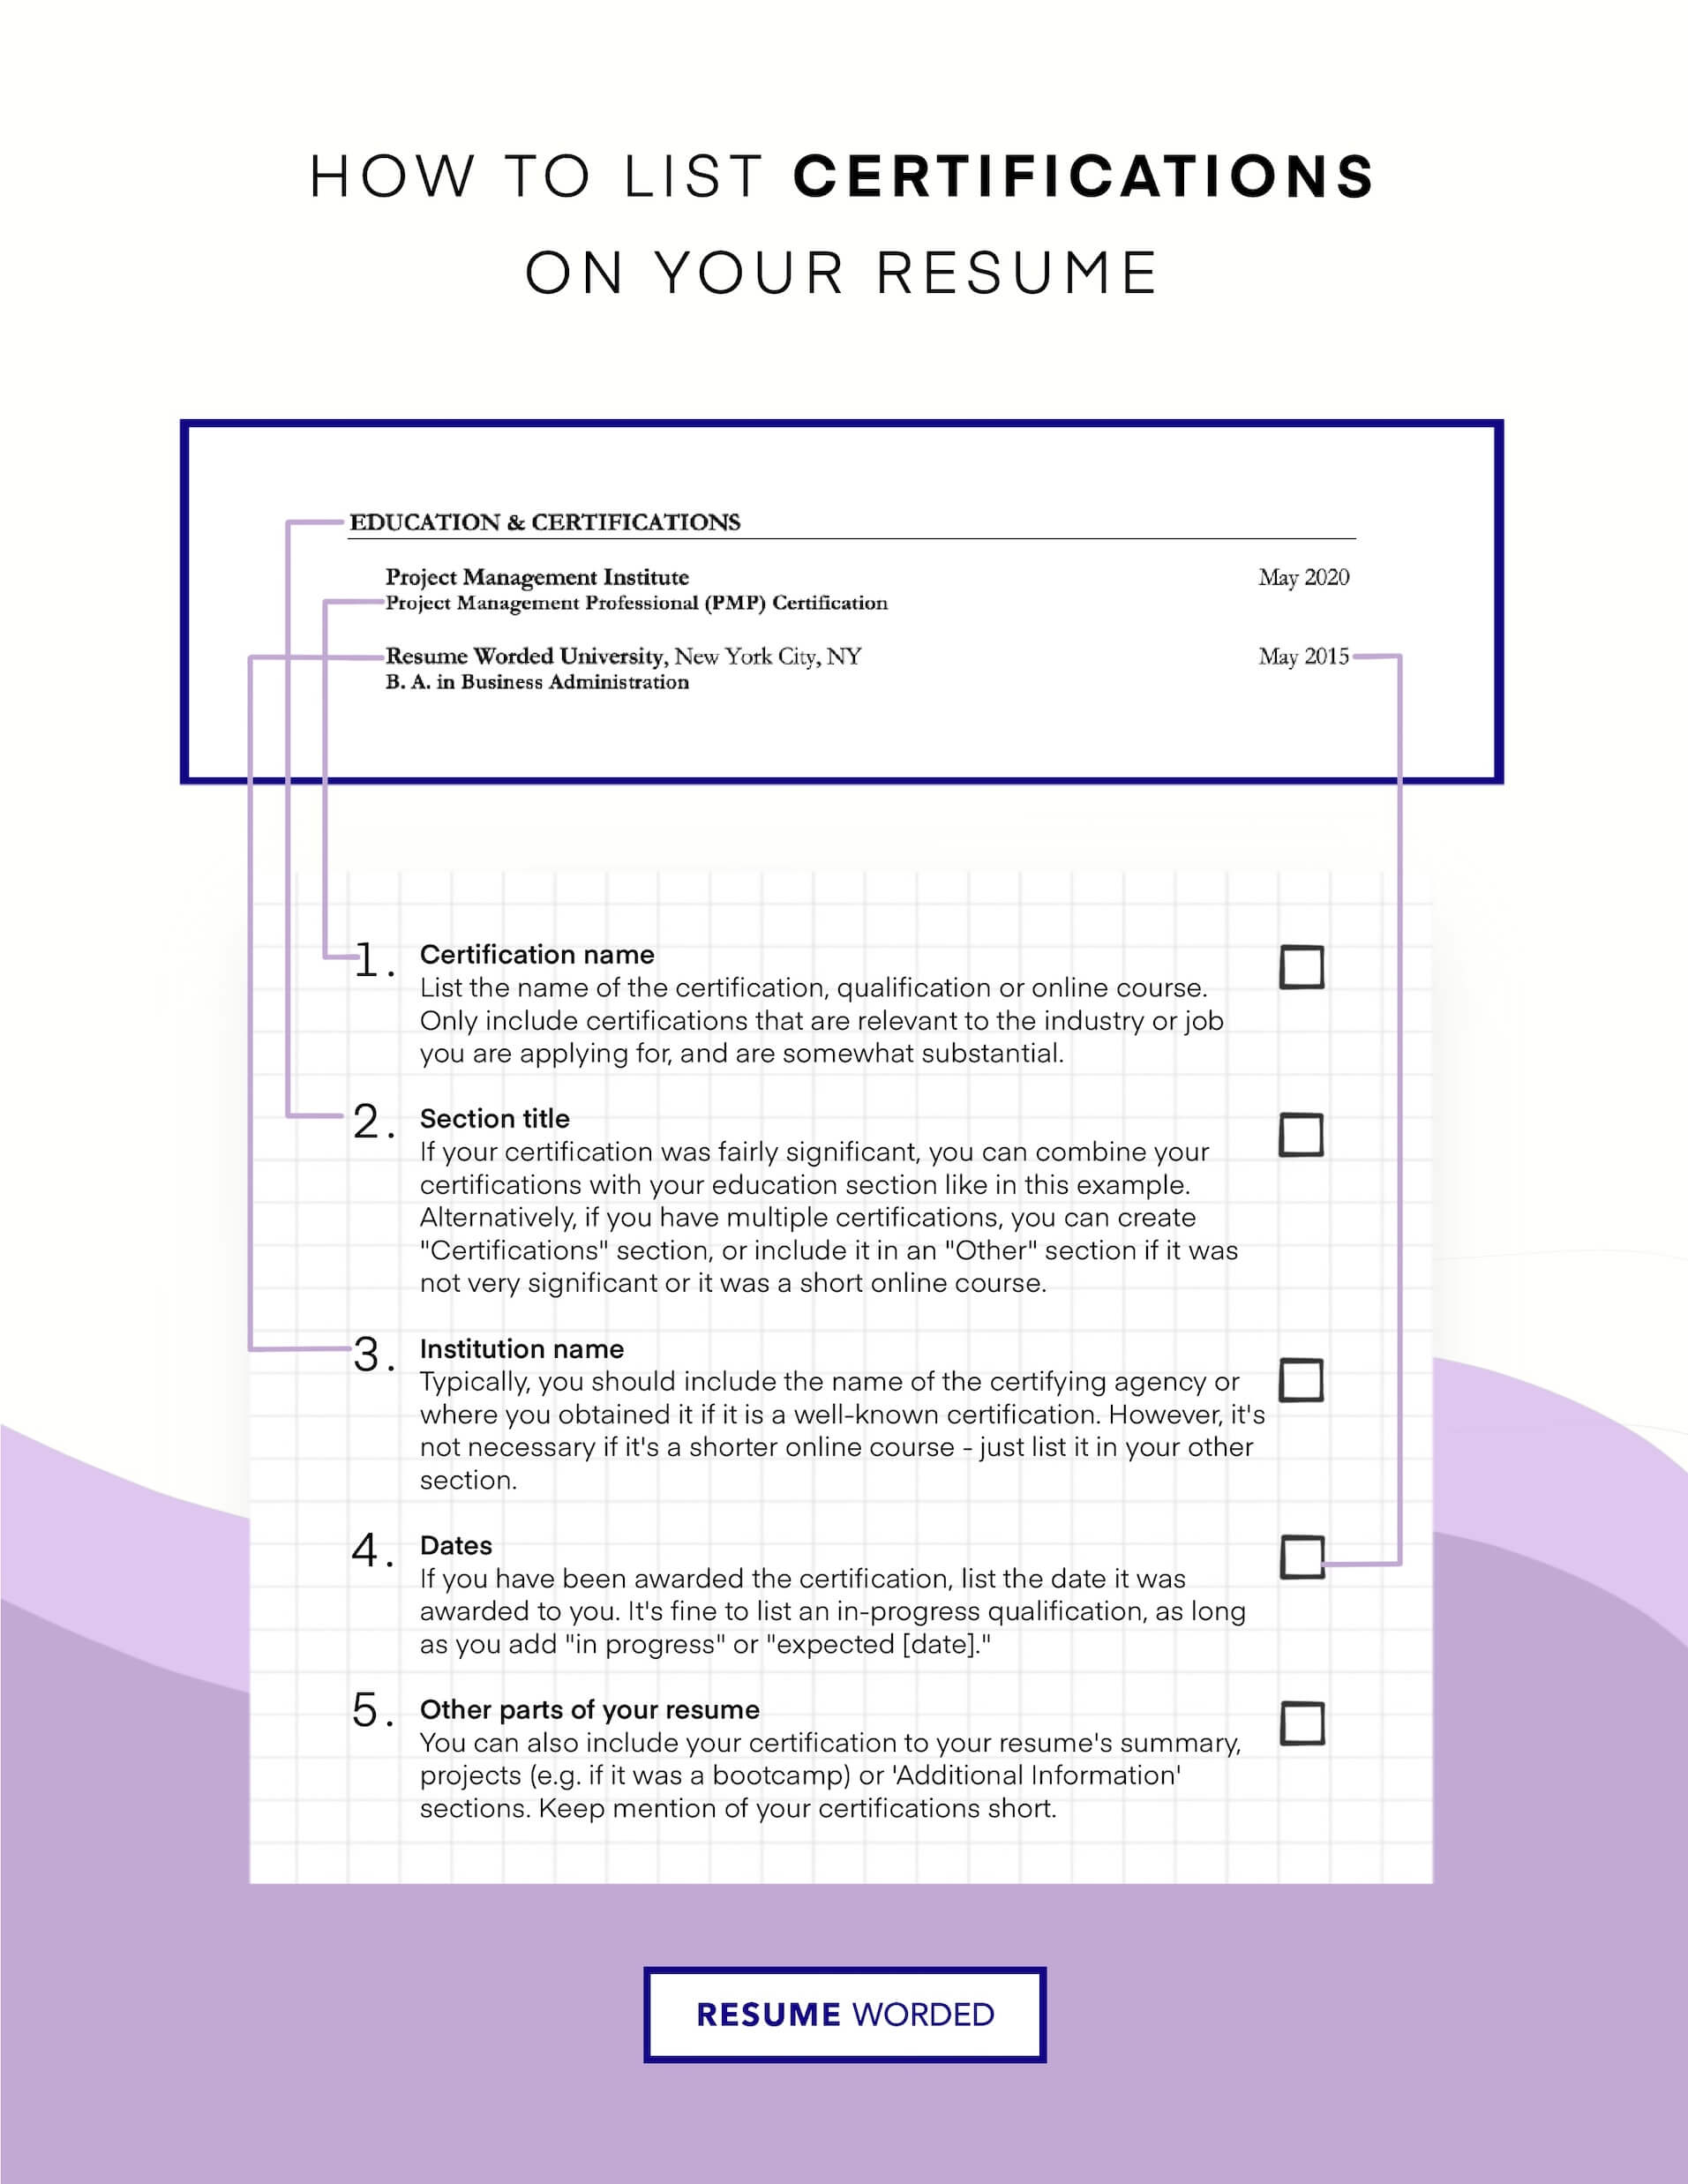 Include any relevant certifications in the particular field you’re applying for. - Consultant  Resume